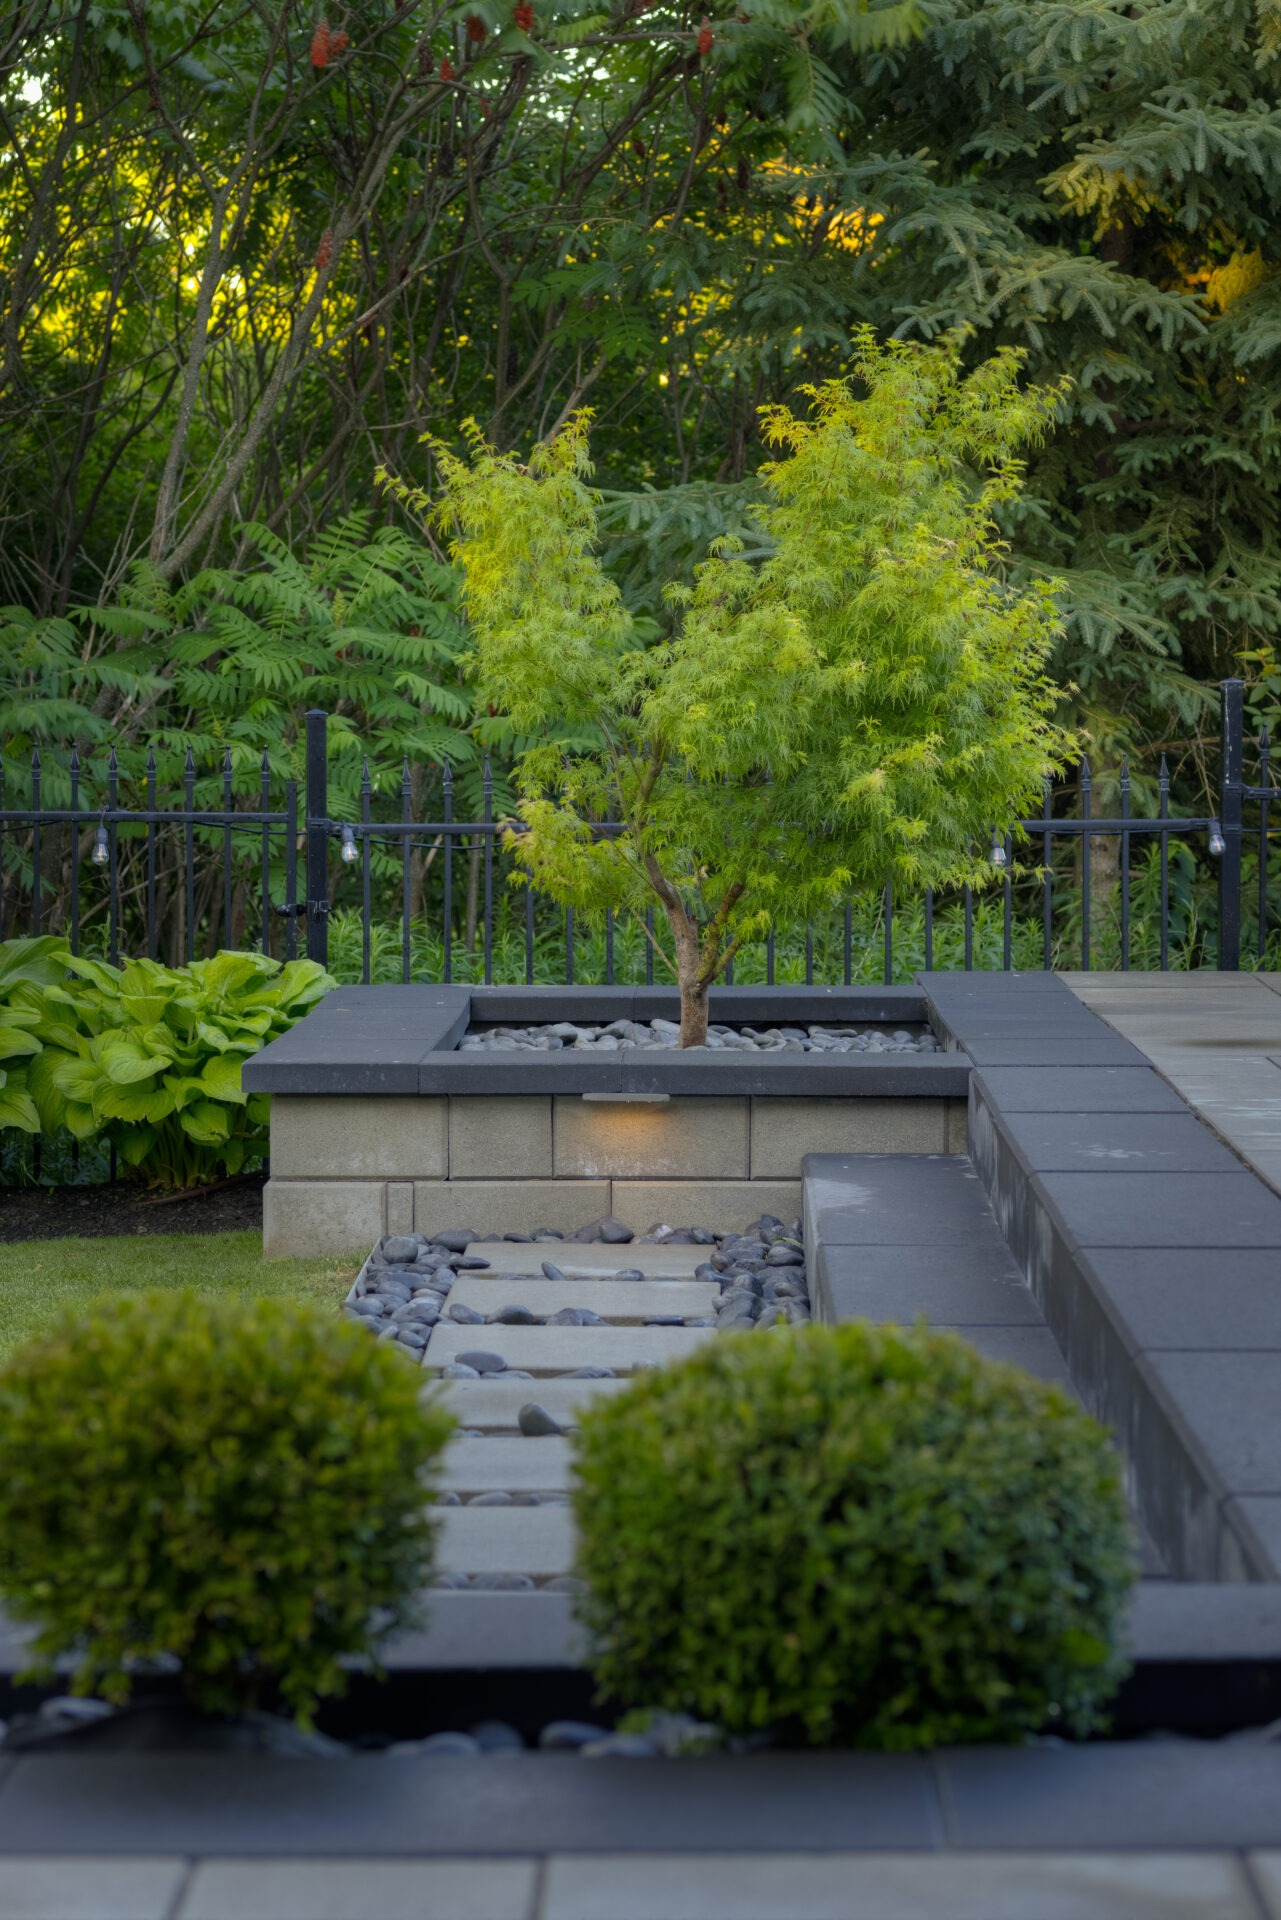 A serene garden pathway lined with neatly trimmed bushes, a small tree centered and a light illuminating steps surrounded by flat stones and greenery.